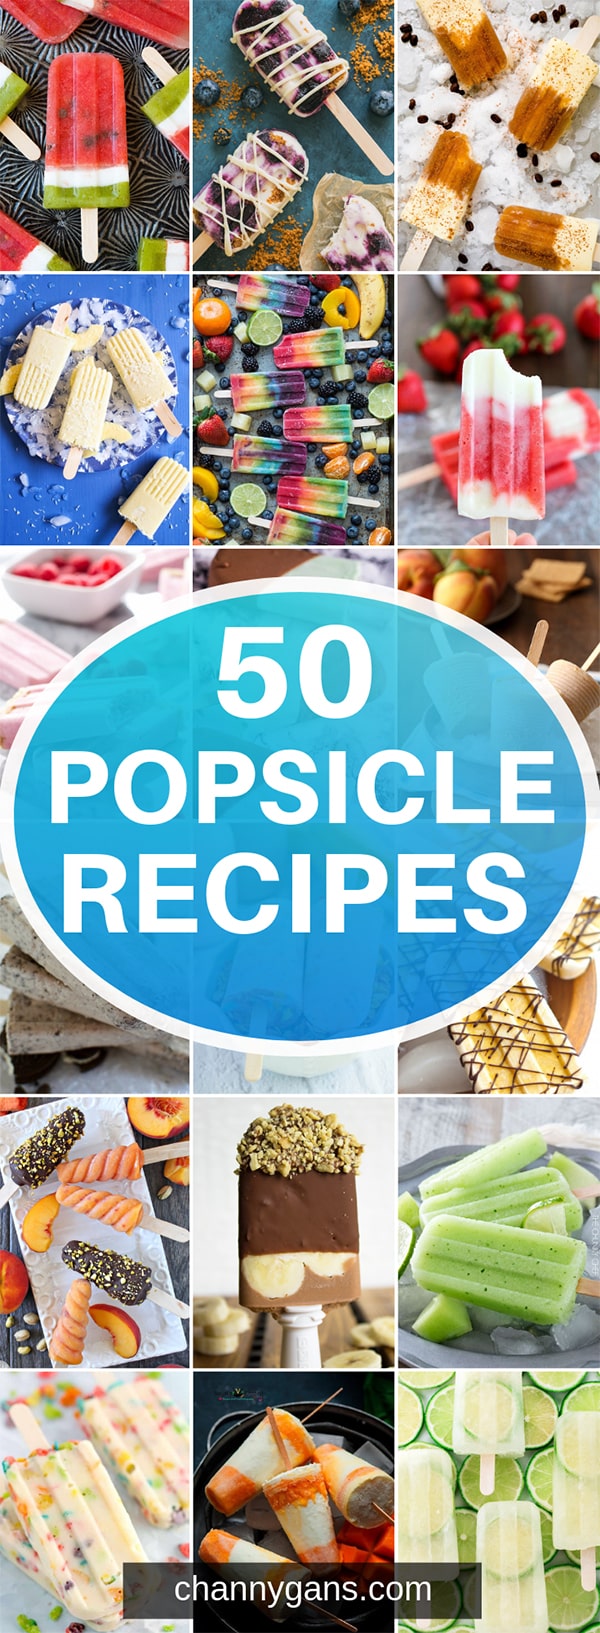 If you are looking for a super easy yet delicious dessert, you have come to the right place. Popsicles are one of the easiest desserts to make and often require very little ingredients. Here are 50 delicious and refreshing popsicle recipes you can choose from.